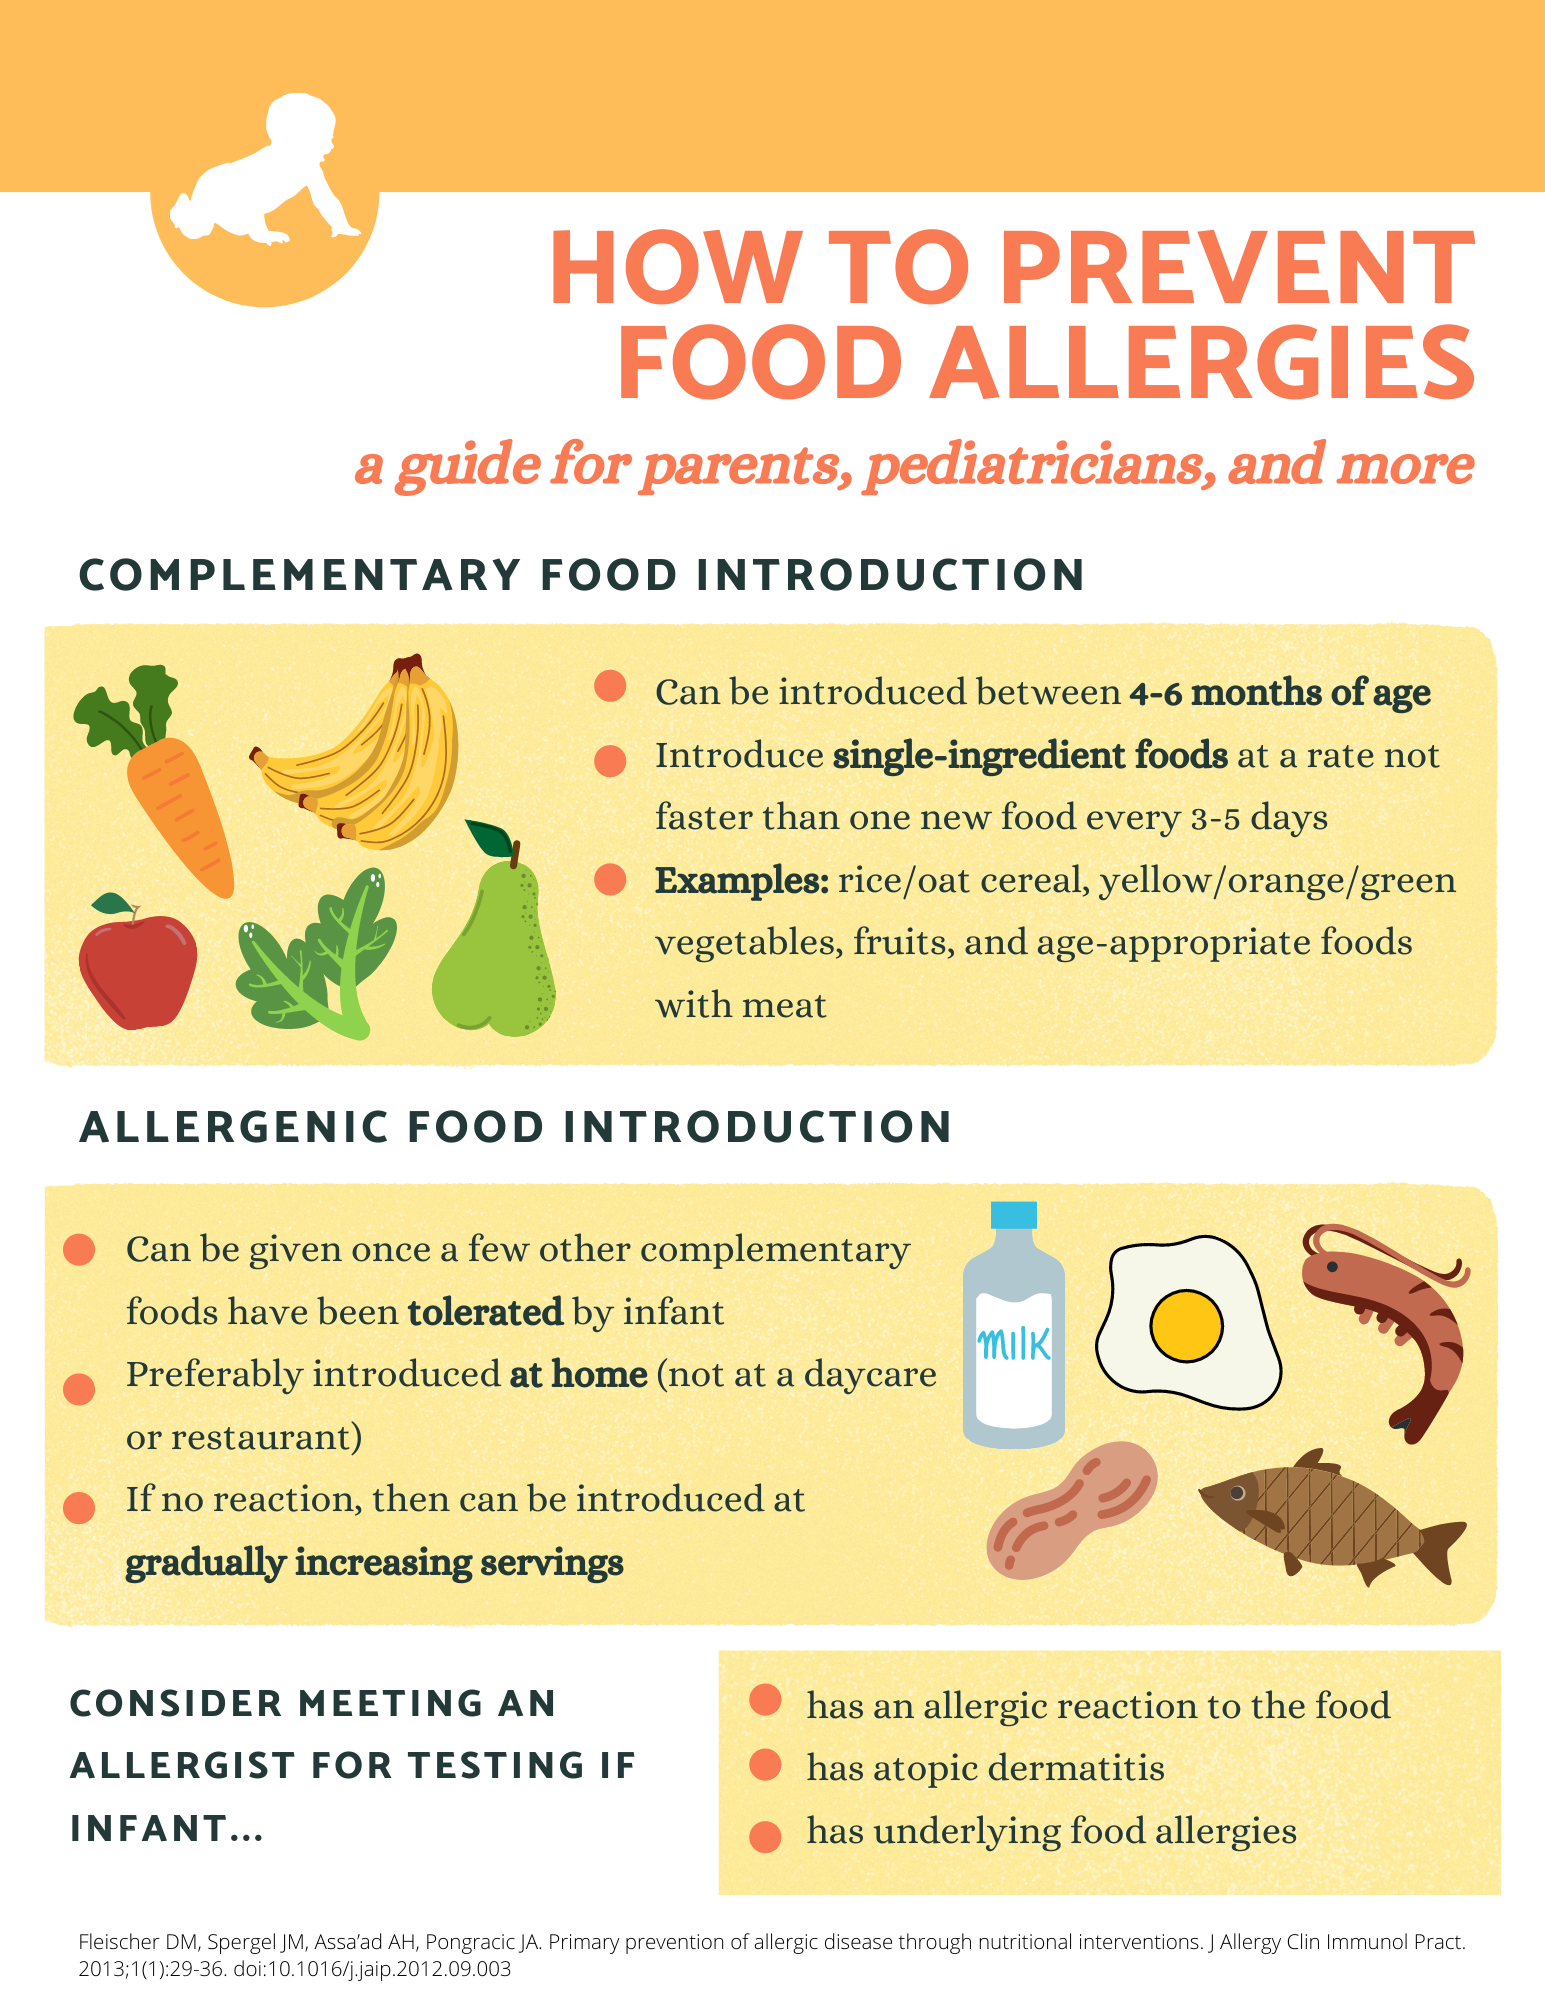 How to prevent food allergies - strategies for parents and pediatricians